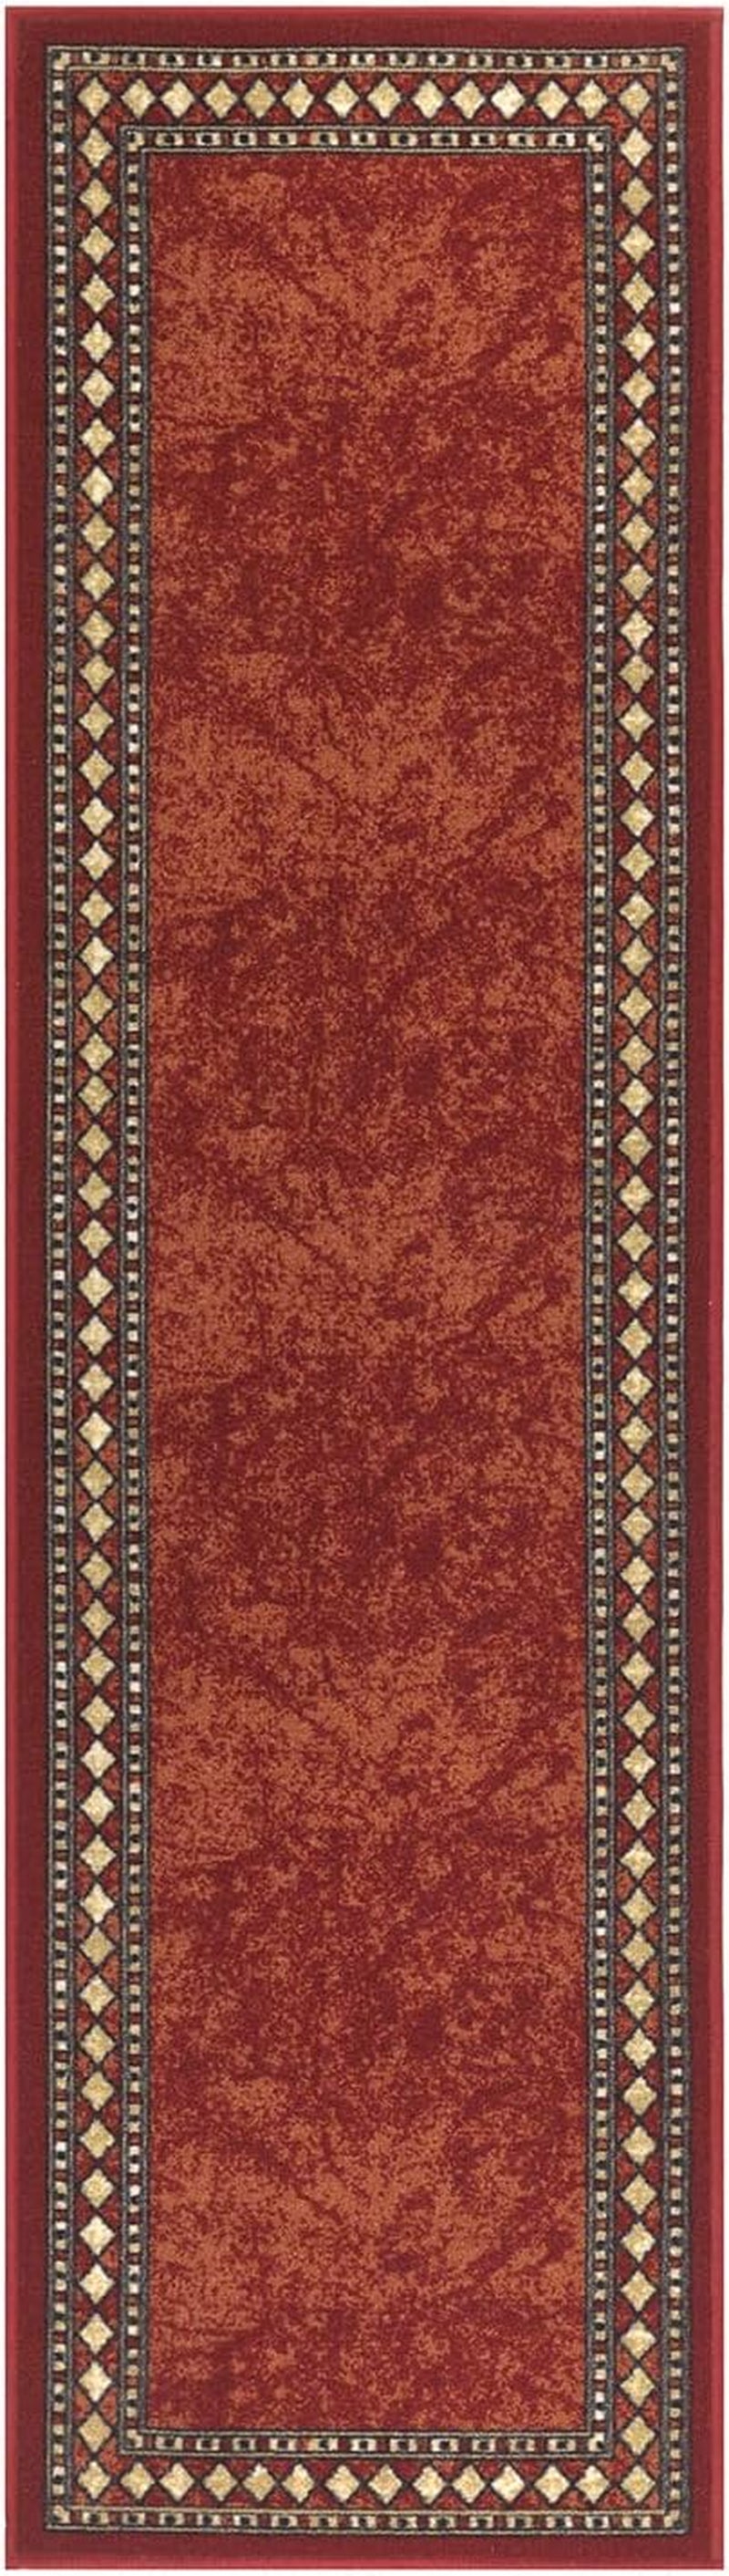 Alfombras Modern Bordered 2X10 Non-Skid (Non-Slip) Low Profile Pile Rubber Backing Indoor Area Runner Rugs (Maroon Beige, 2' X 10')